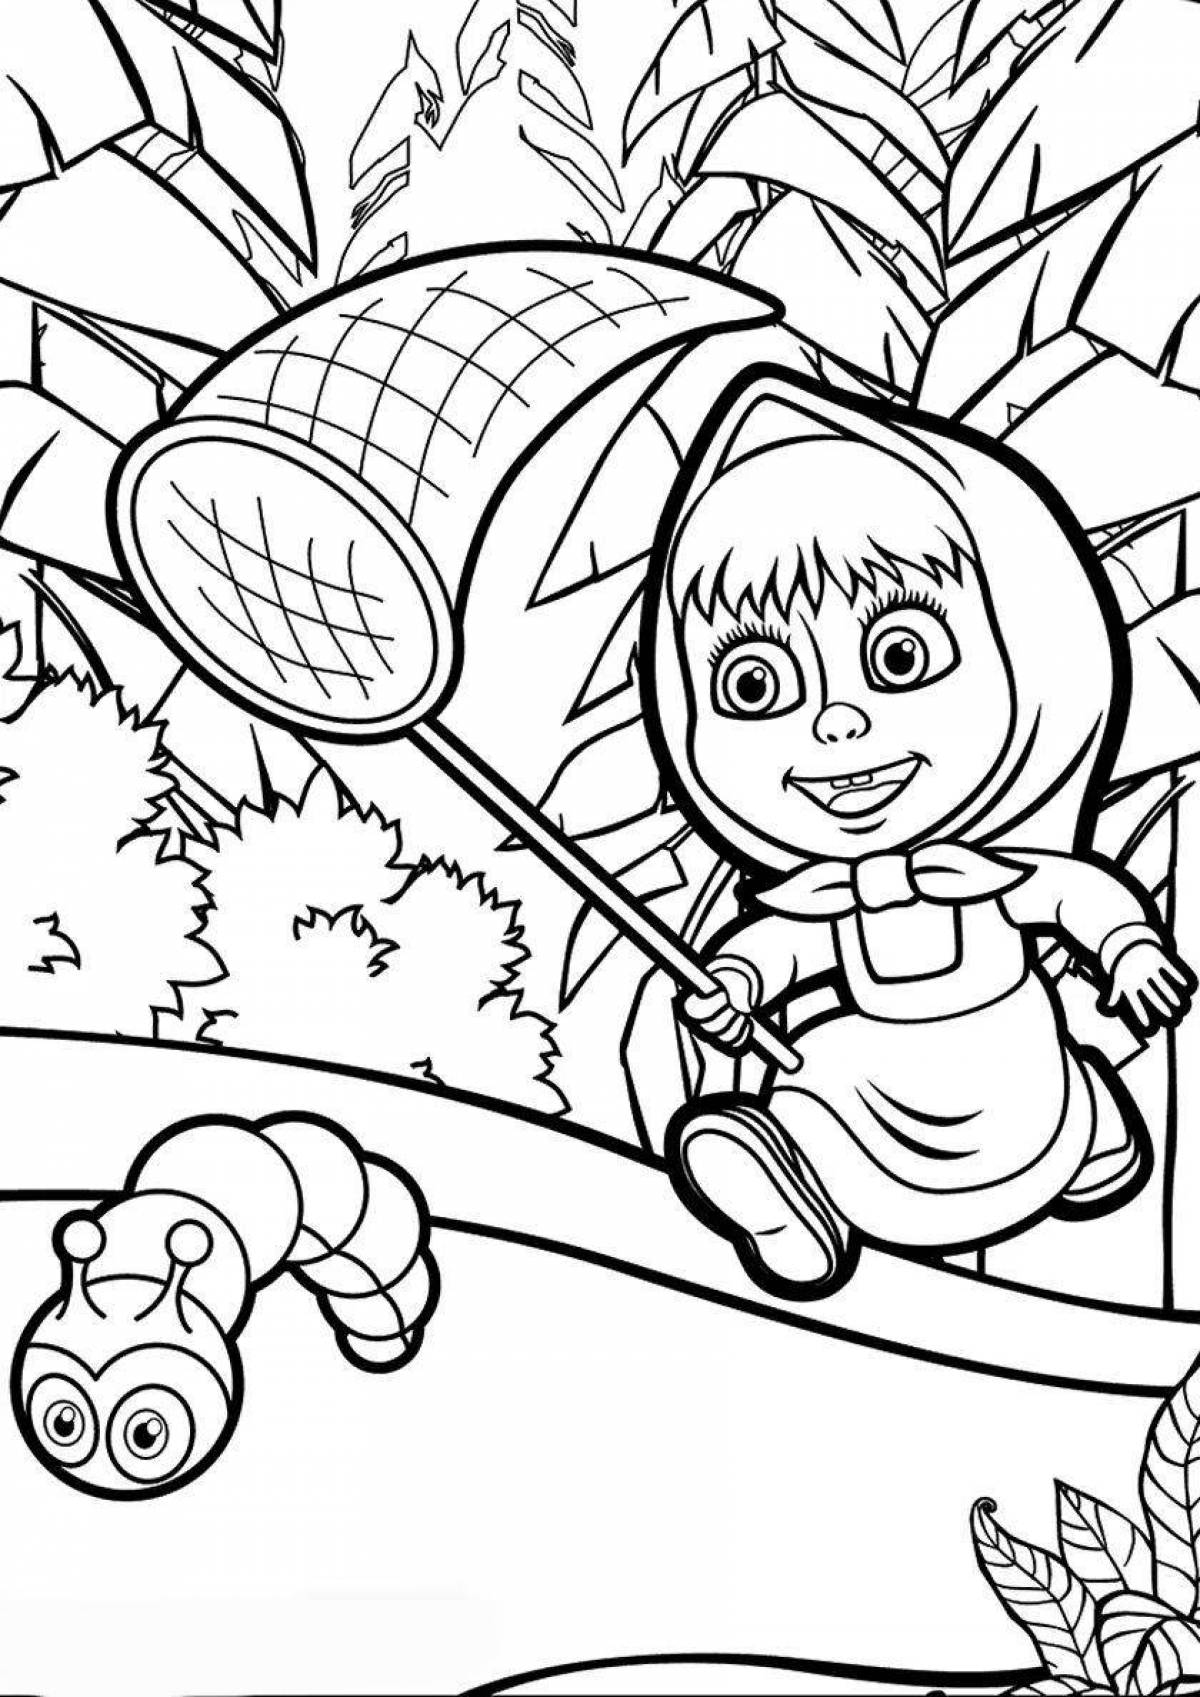 Color-lively masha and the bear coloring book